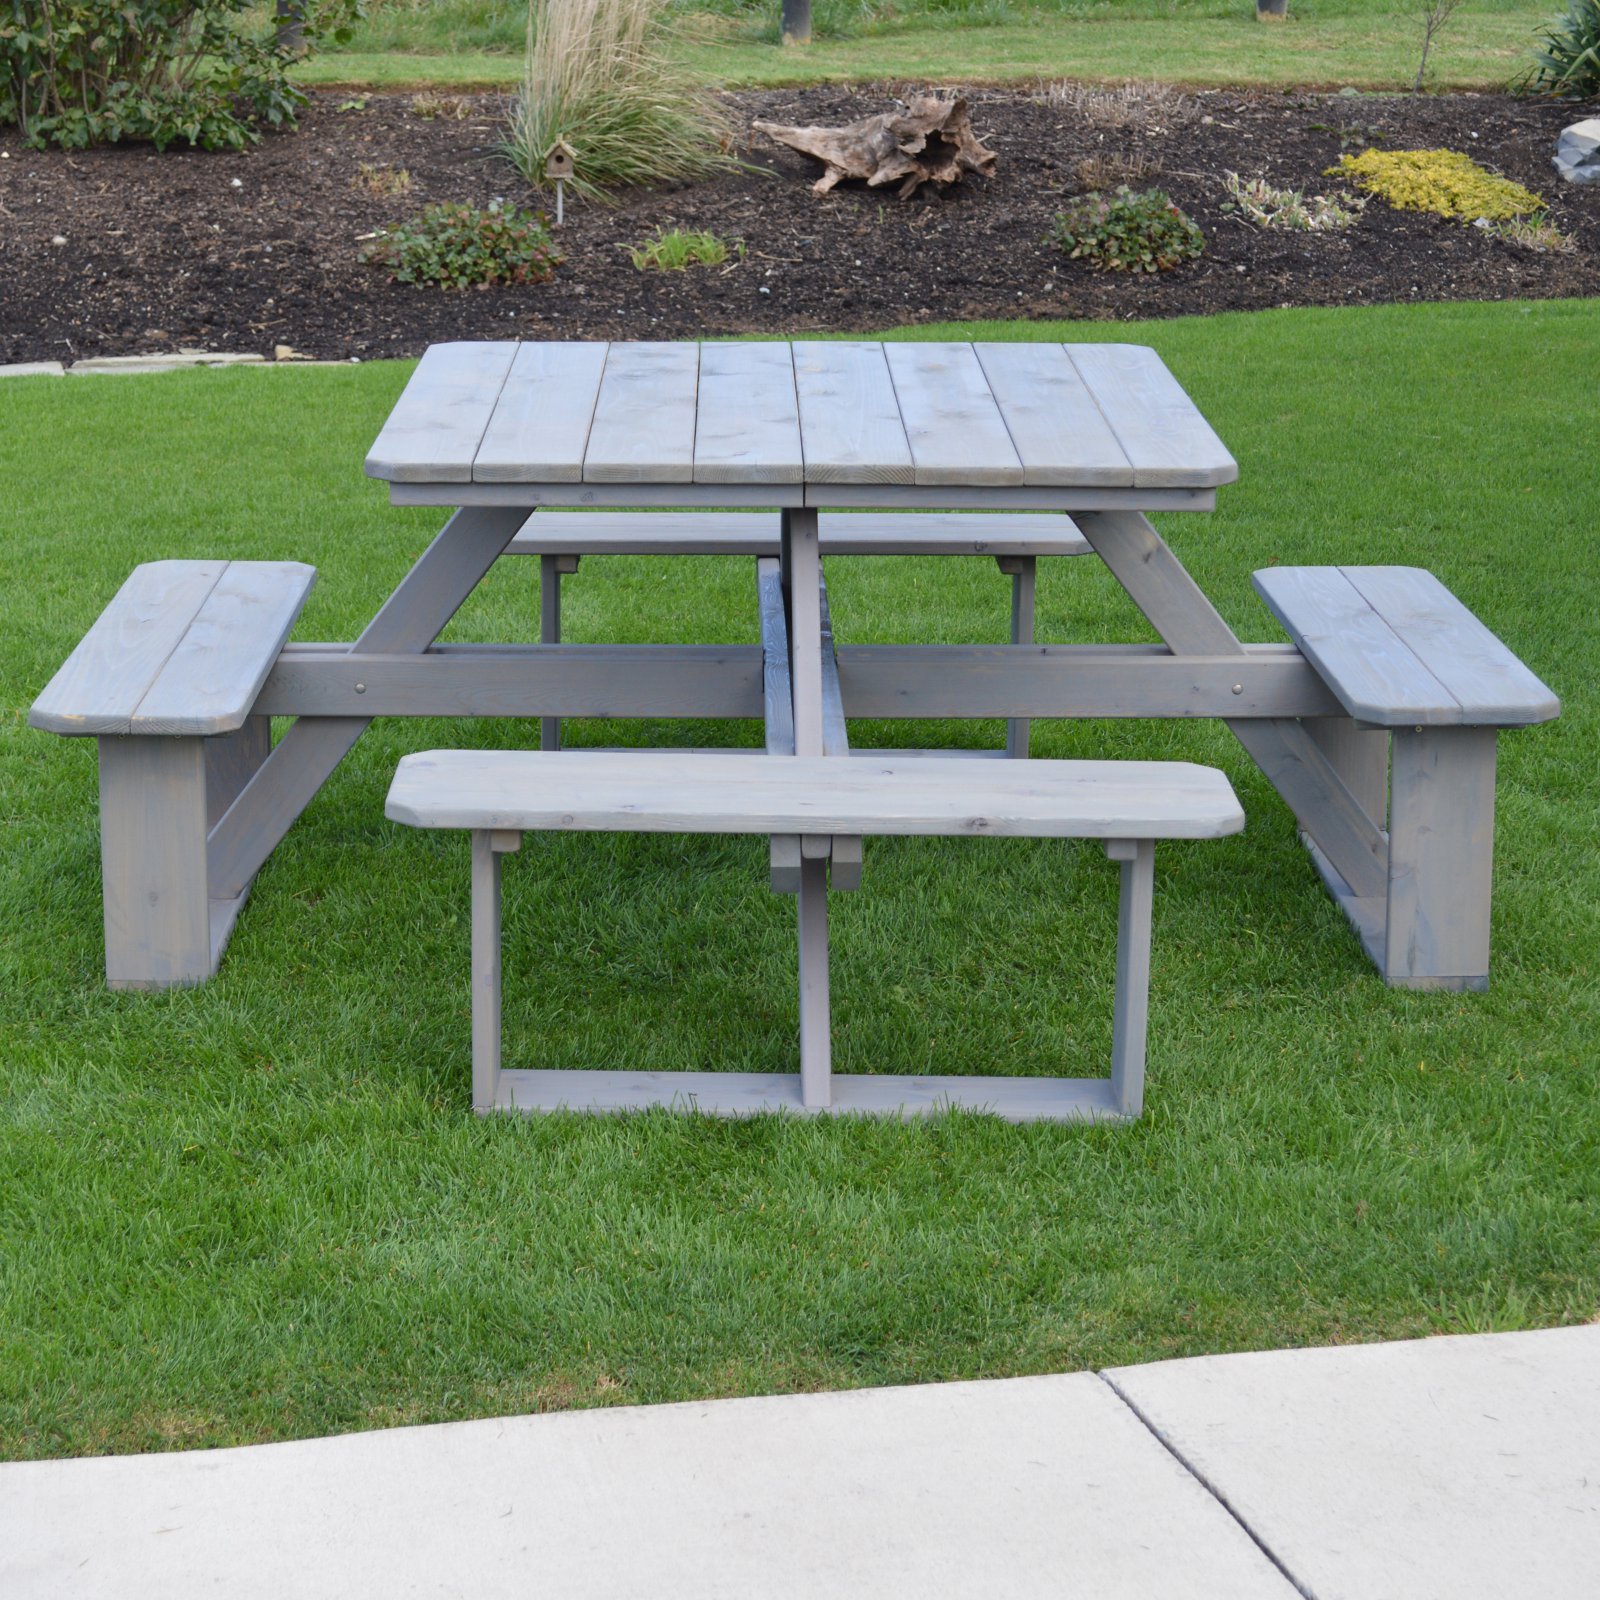 A &amp; L Furniture 44 in. Square Walk-In Wood Picnic Table with Optional Umbrella Hole - image 2 of 2